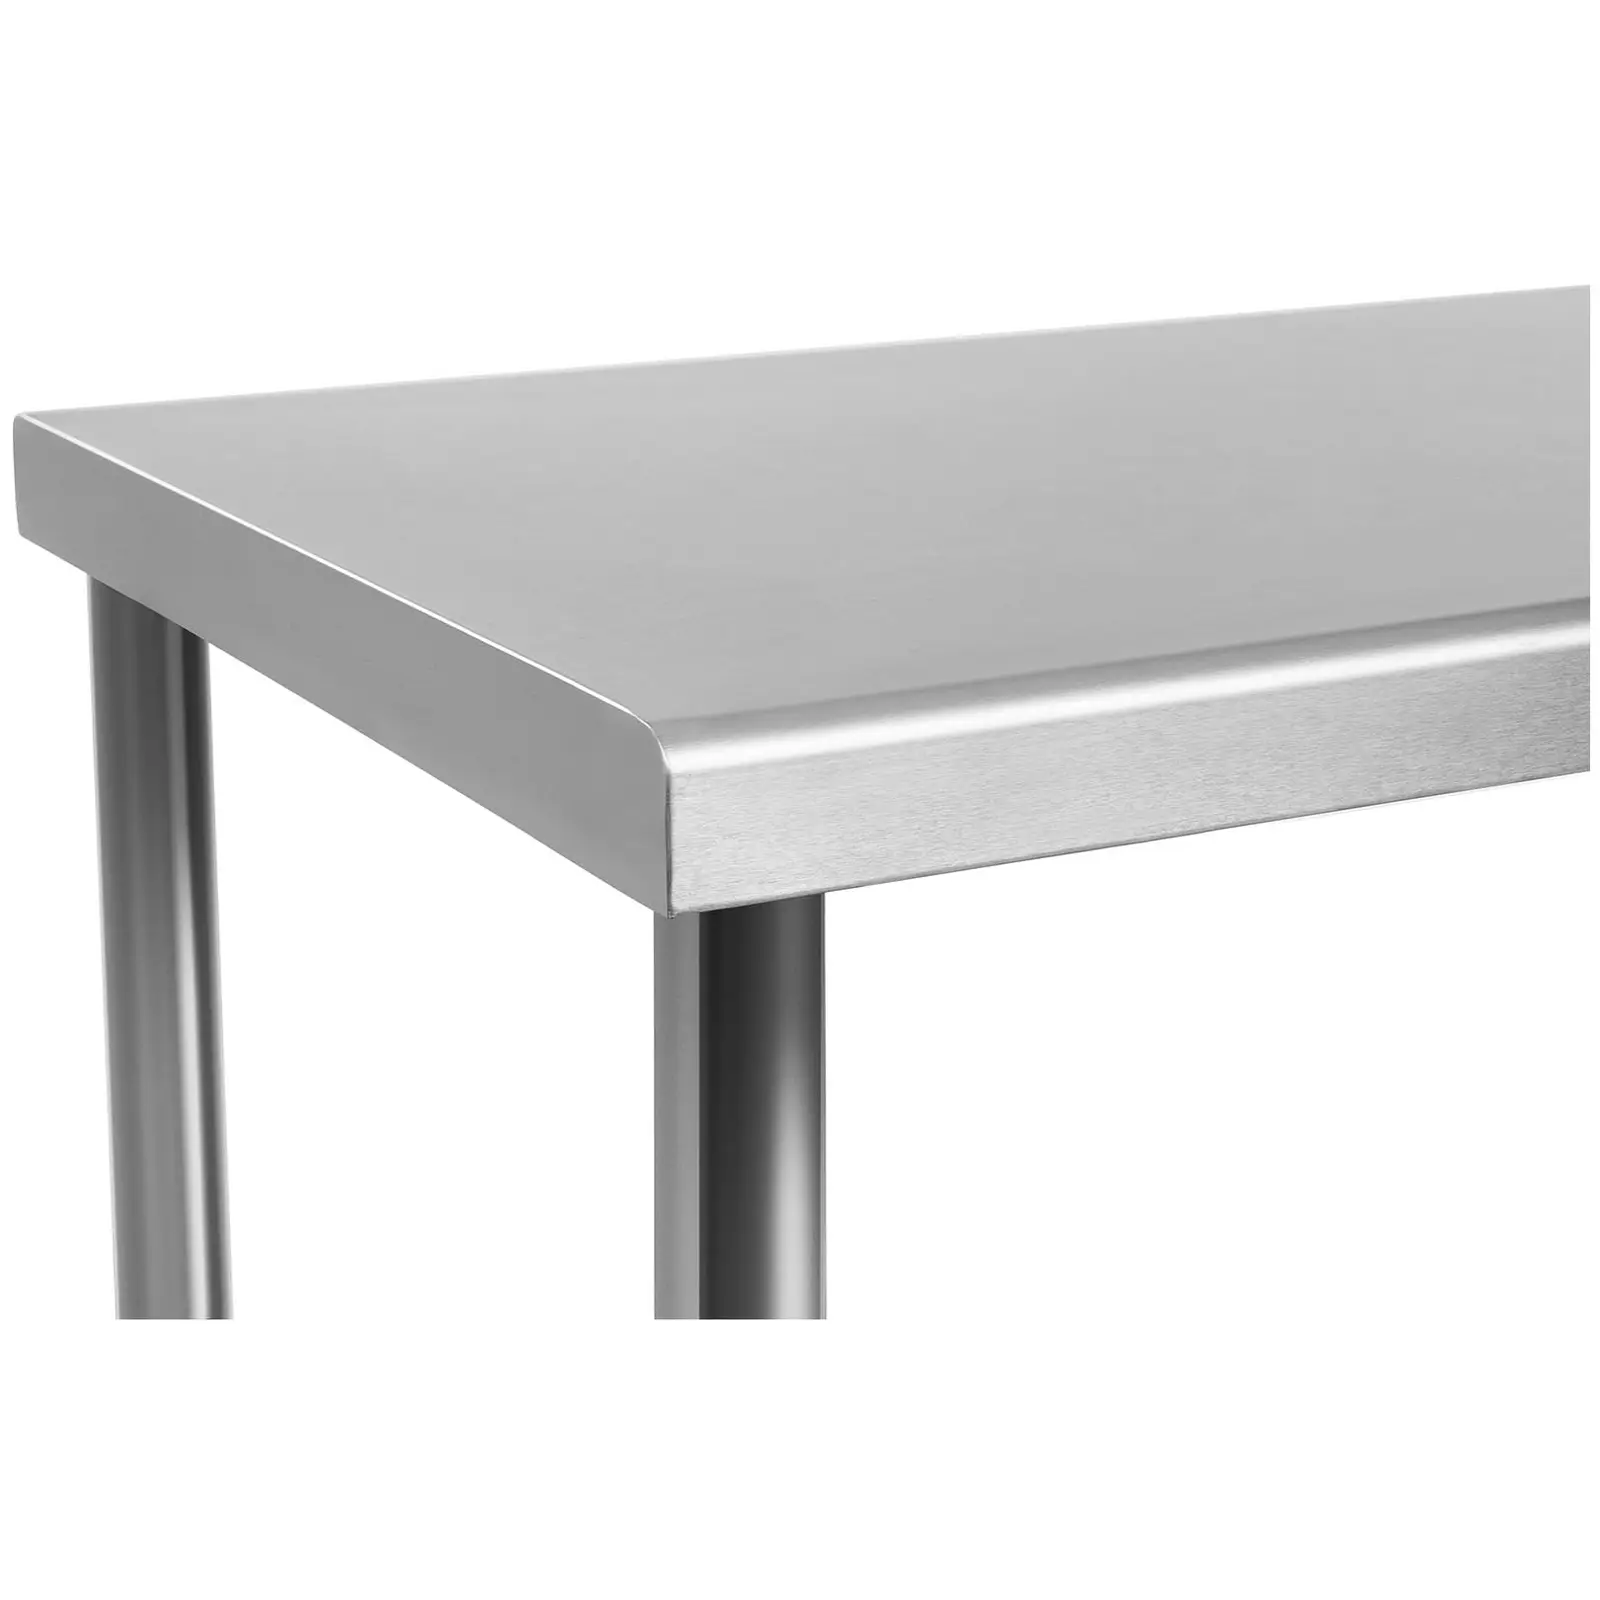 Stainless Steel Table - 120 x 60 cm - 137 kg loading capacity